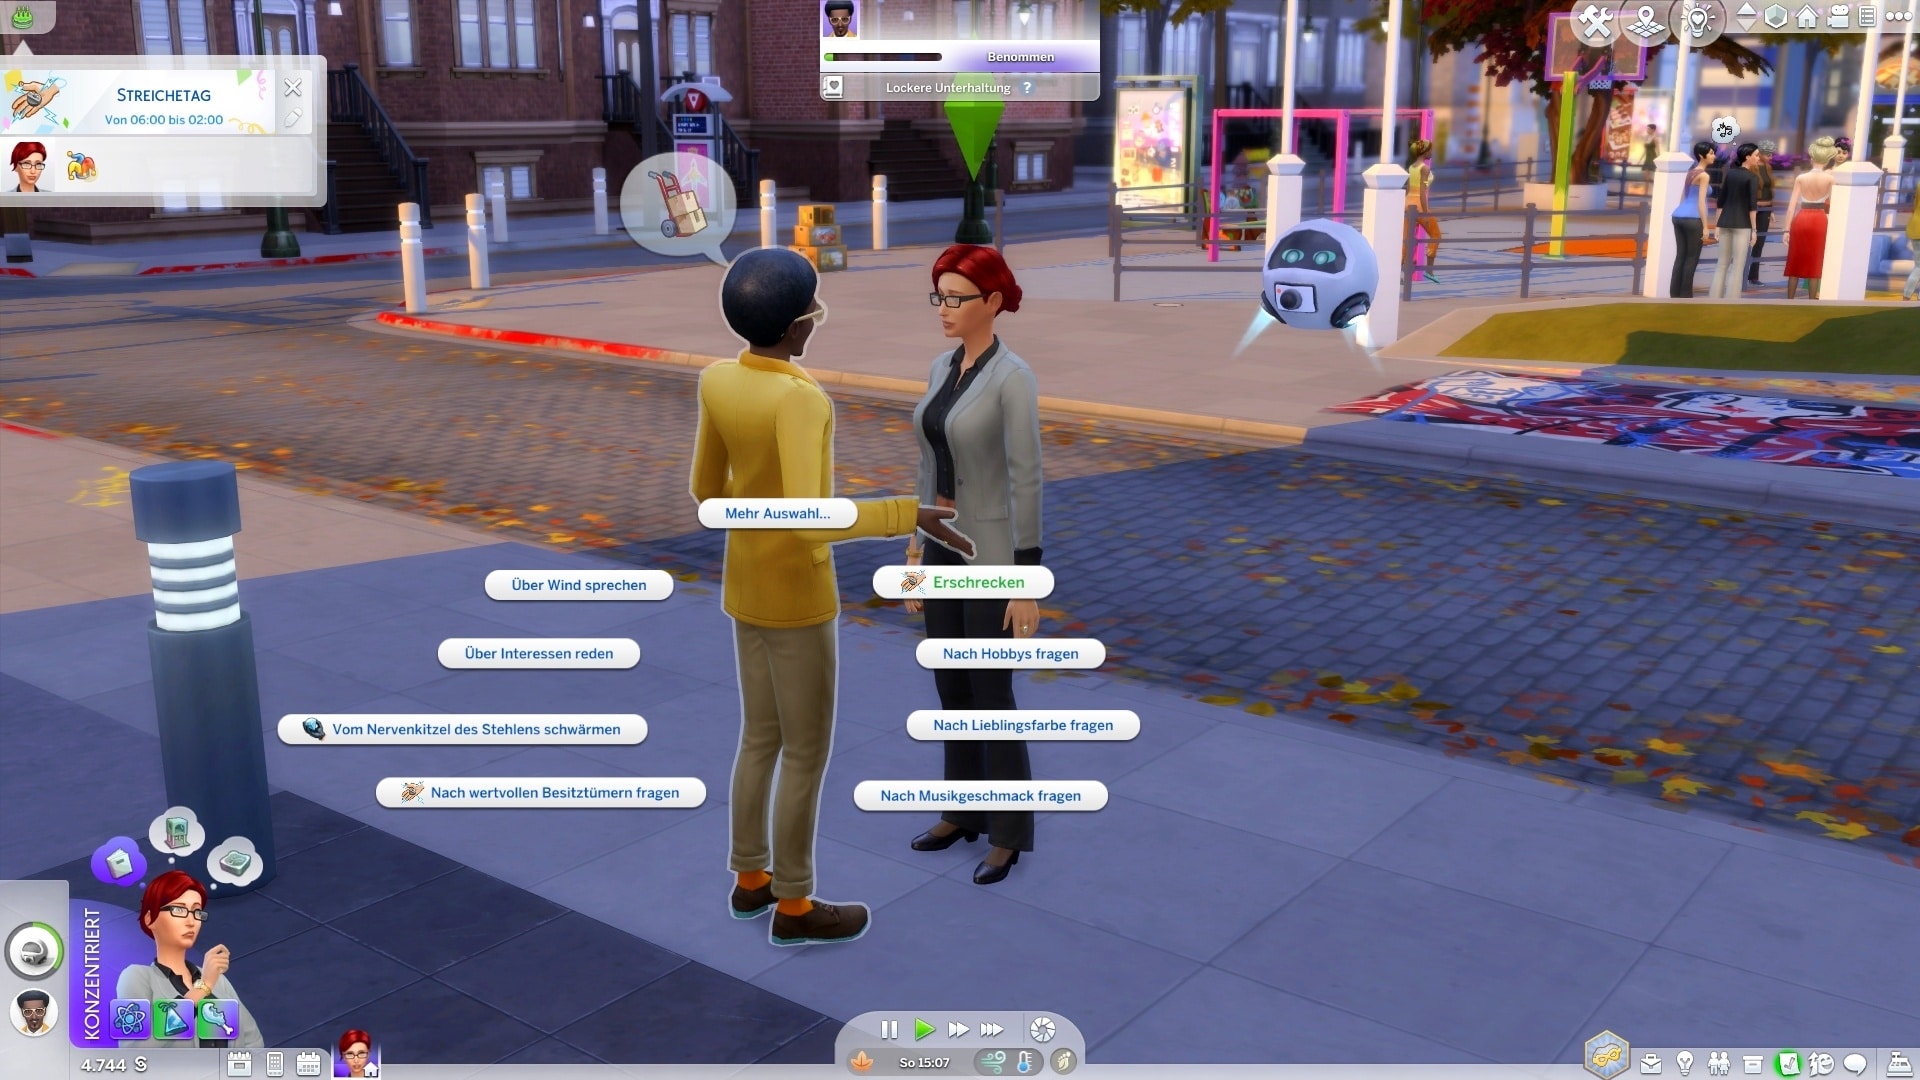 With streaming drone in the background, I decide what nastiness this poor Sim should suffer.